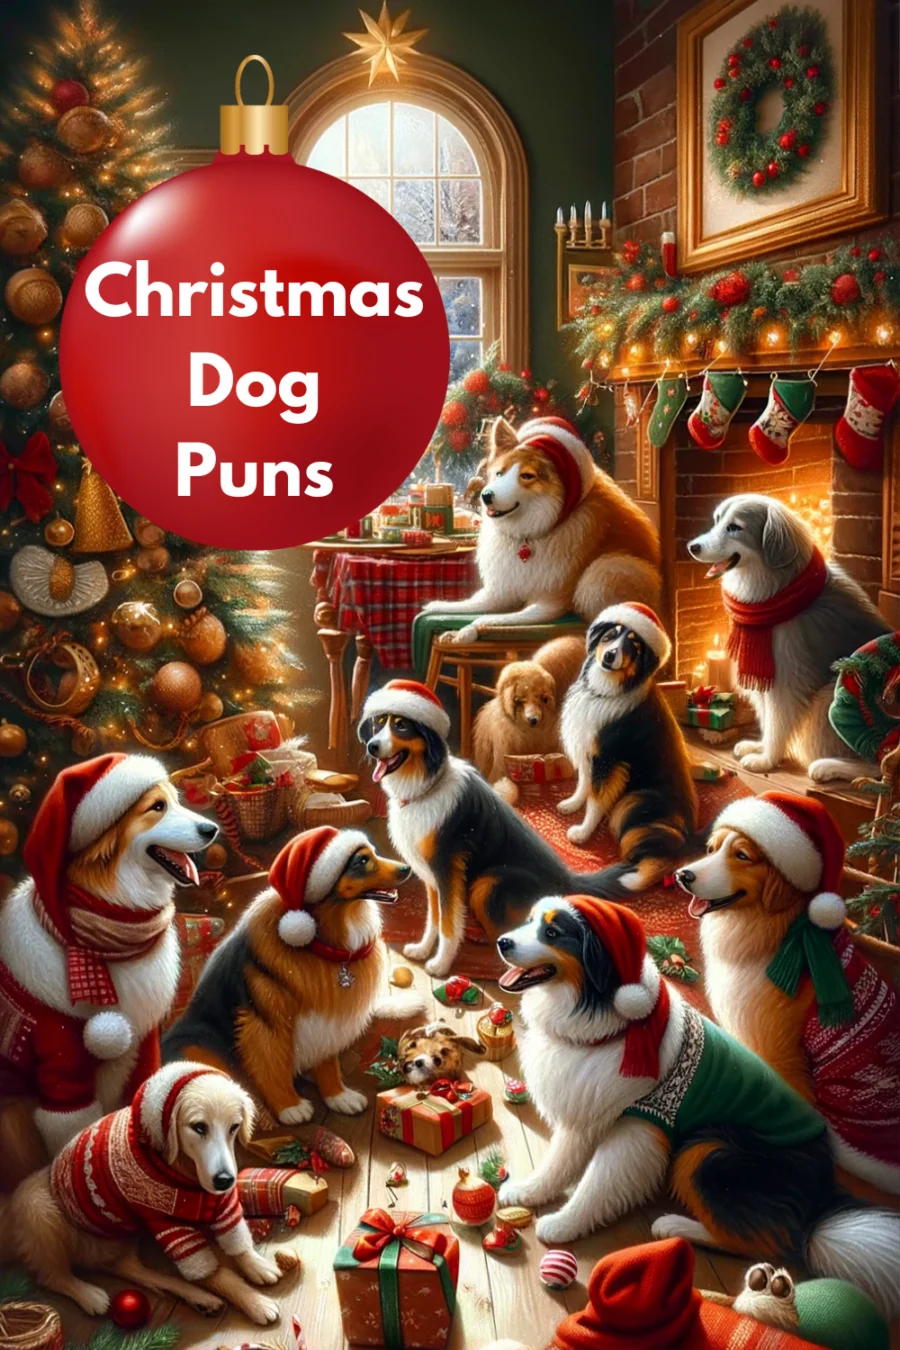 illustration of dogs around a Christmas tree with stockings hung by fireplace. Words 